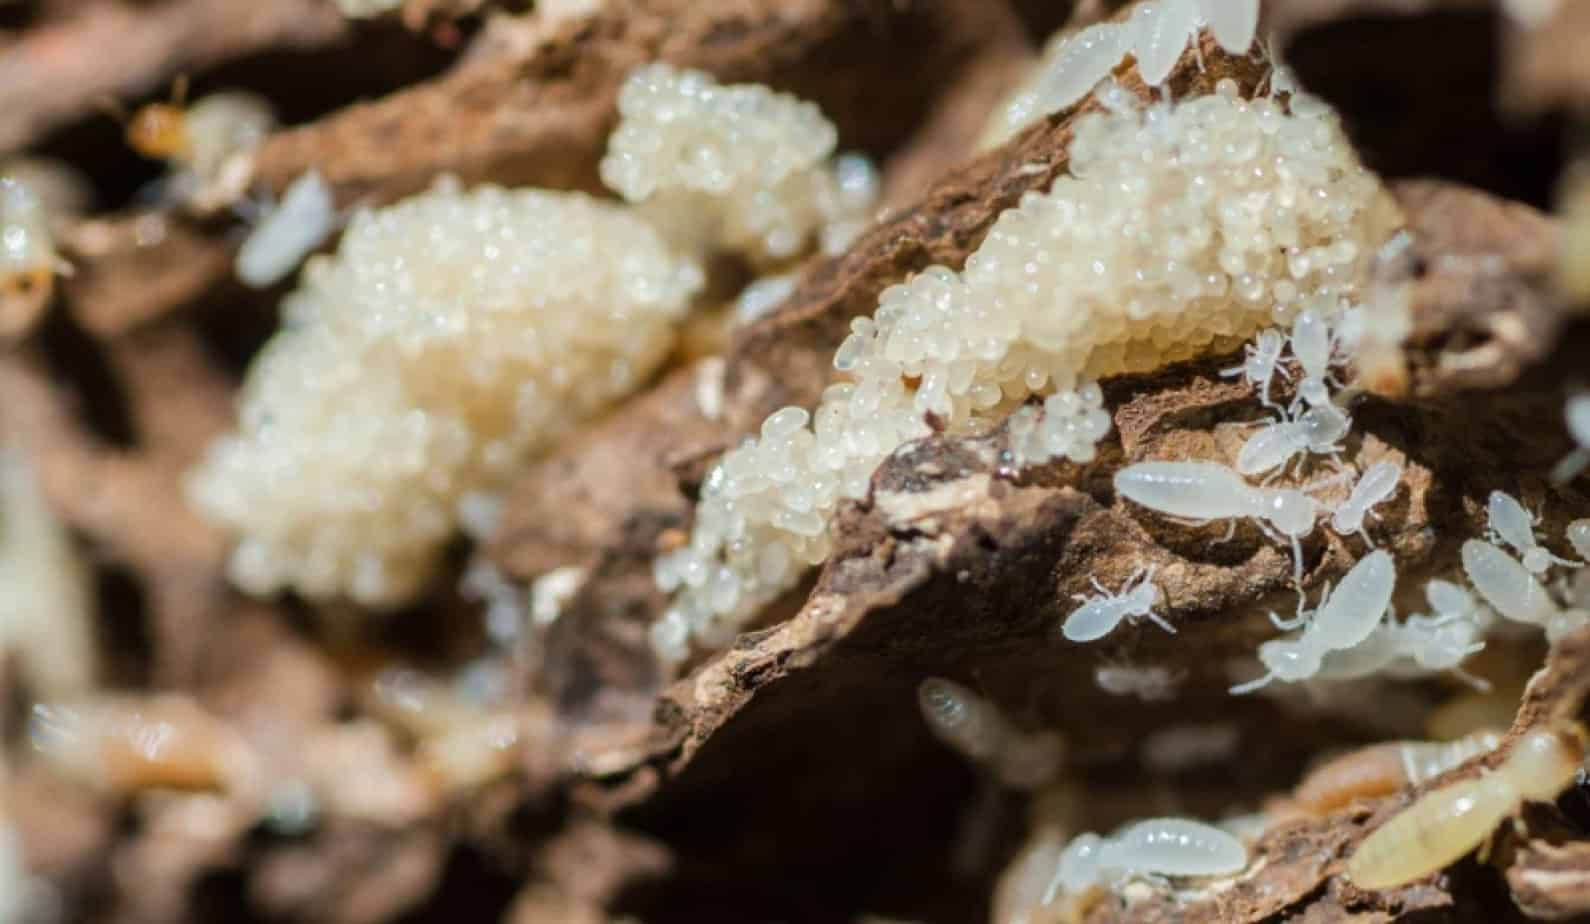 The Different Stages of Termite Life Cycle - Pest Control Hacks